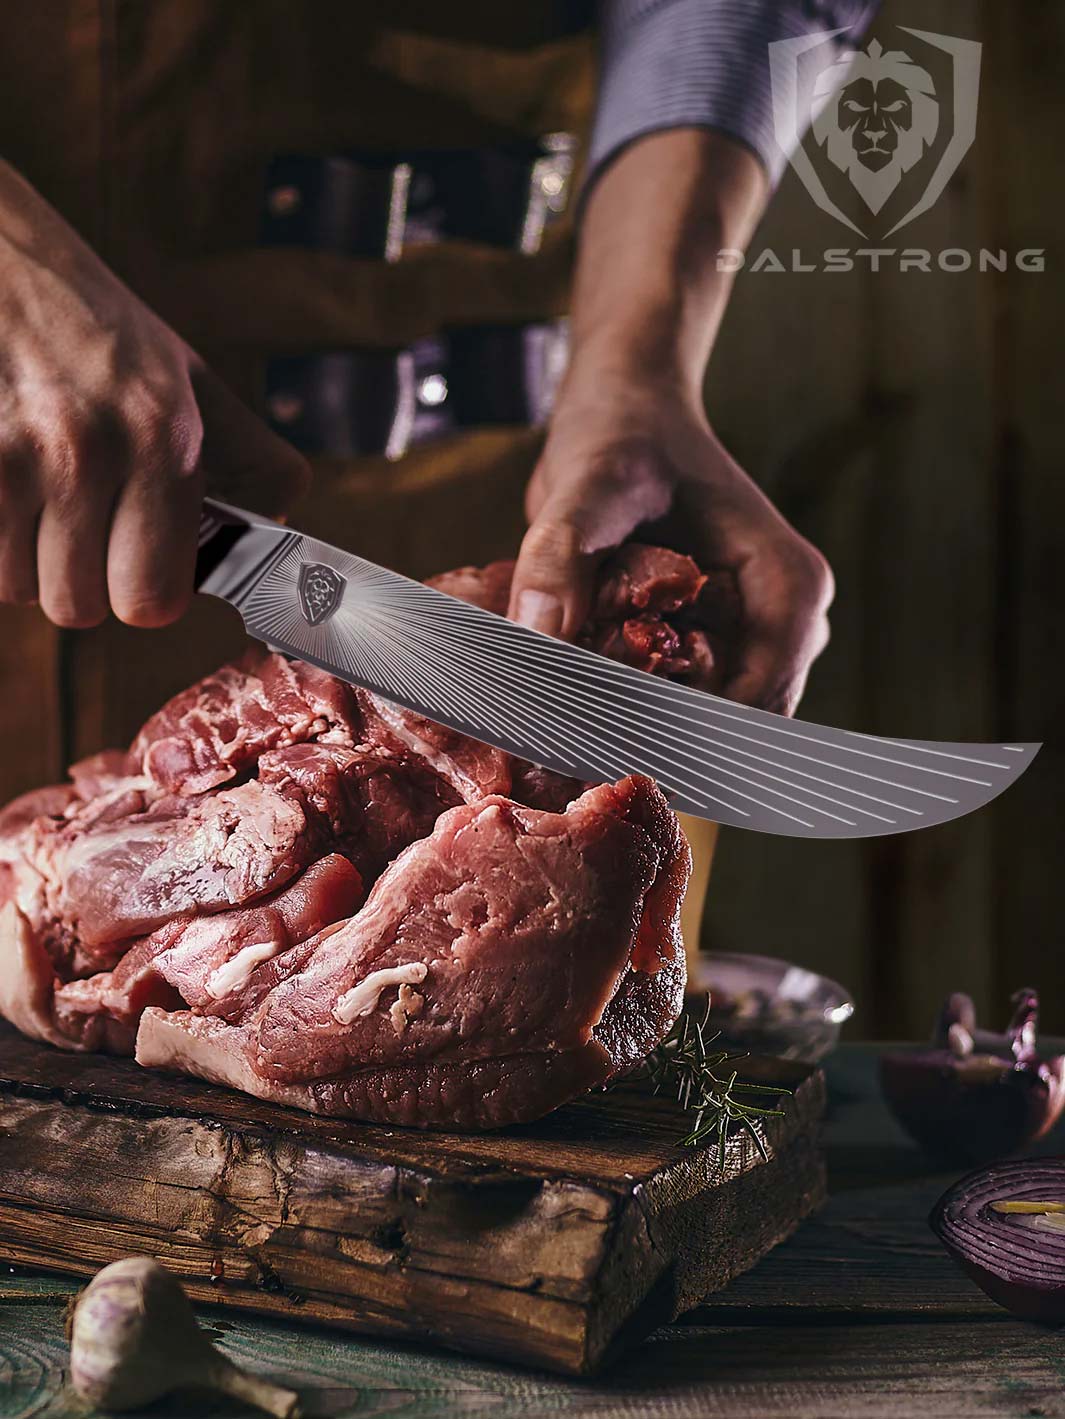 Dalstrong quantum 1 series 10 inch butcher knife with dragon skin handle and a large cut of meat.